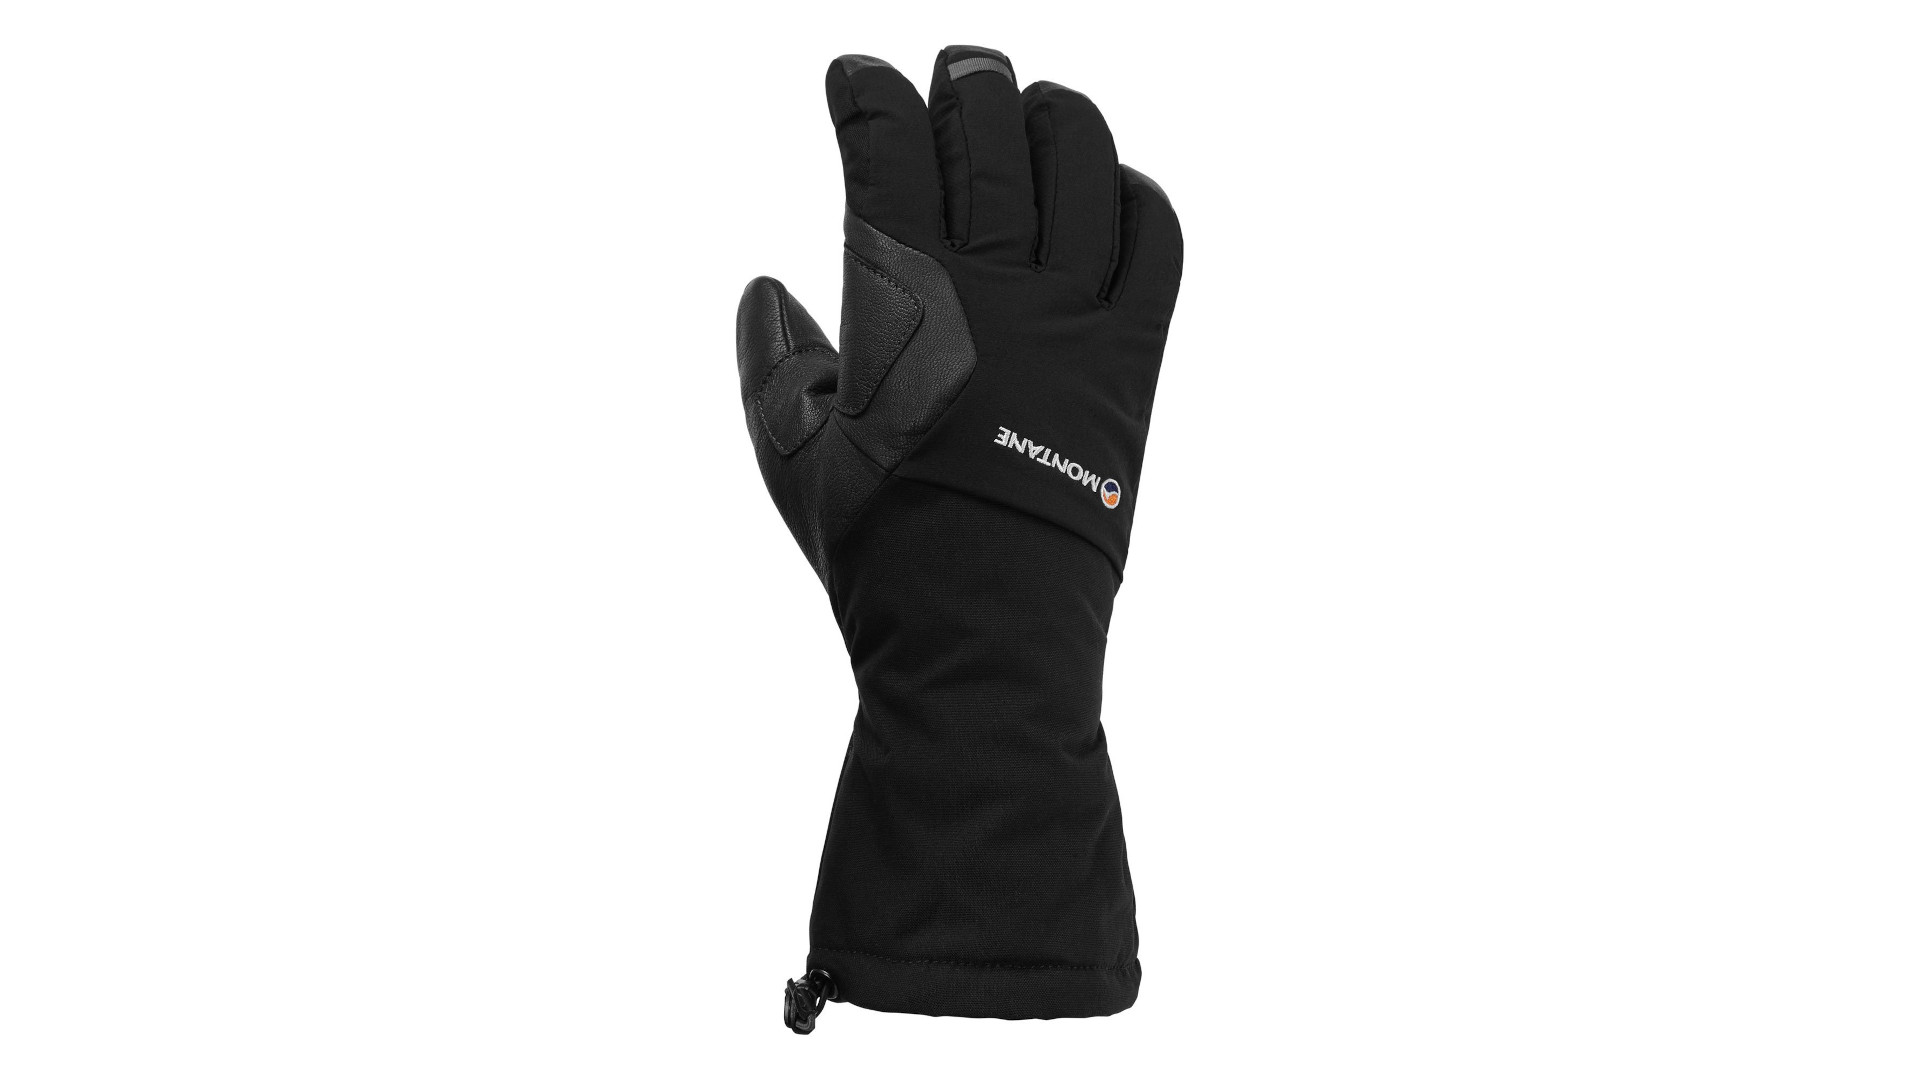 Montane Supercell Waterproof Glove review: tough protection in a ...